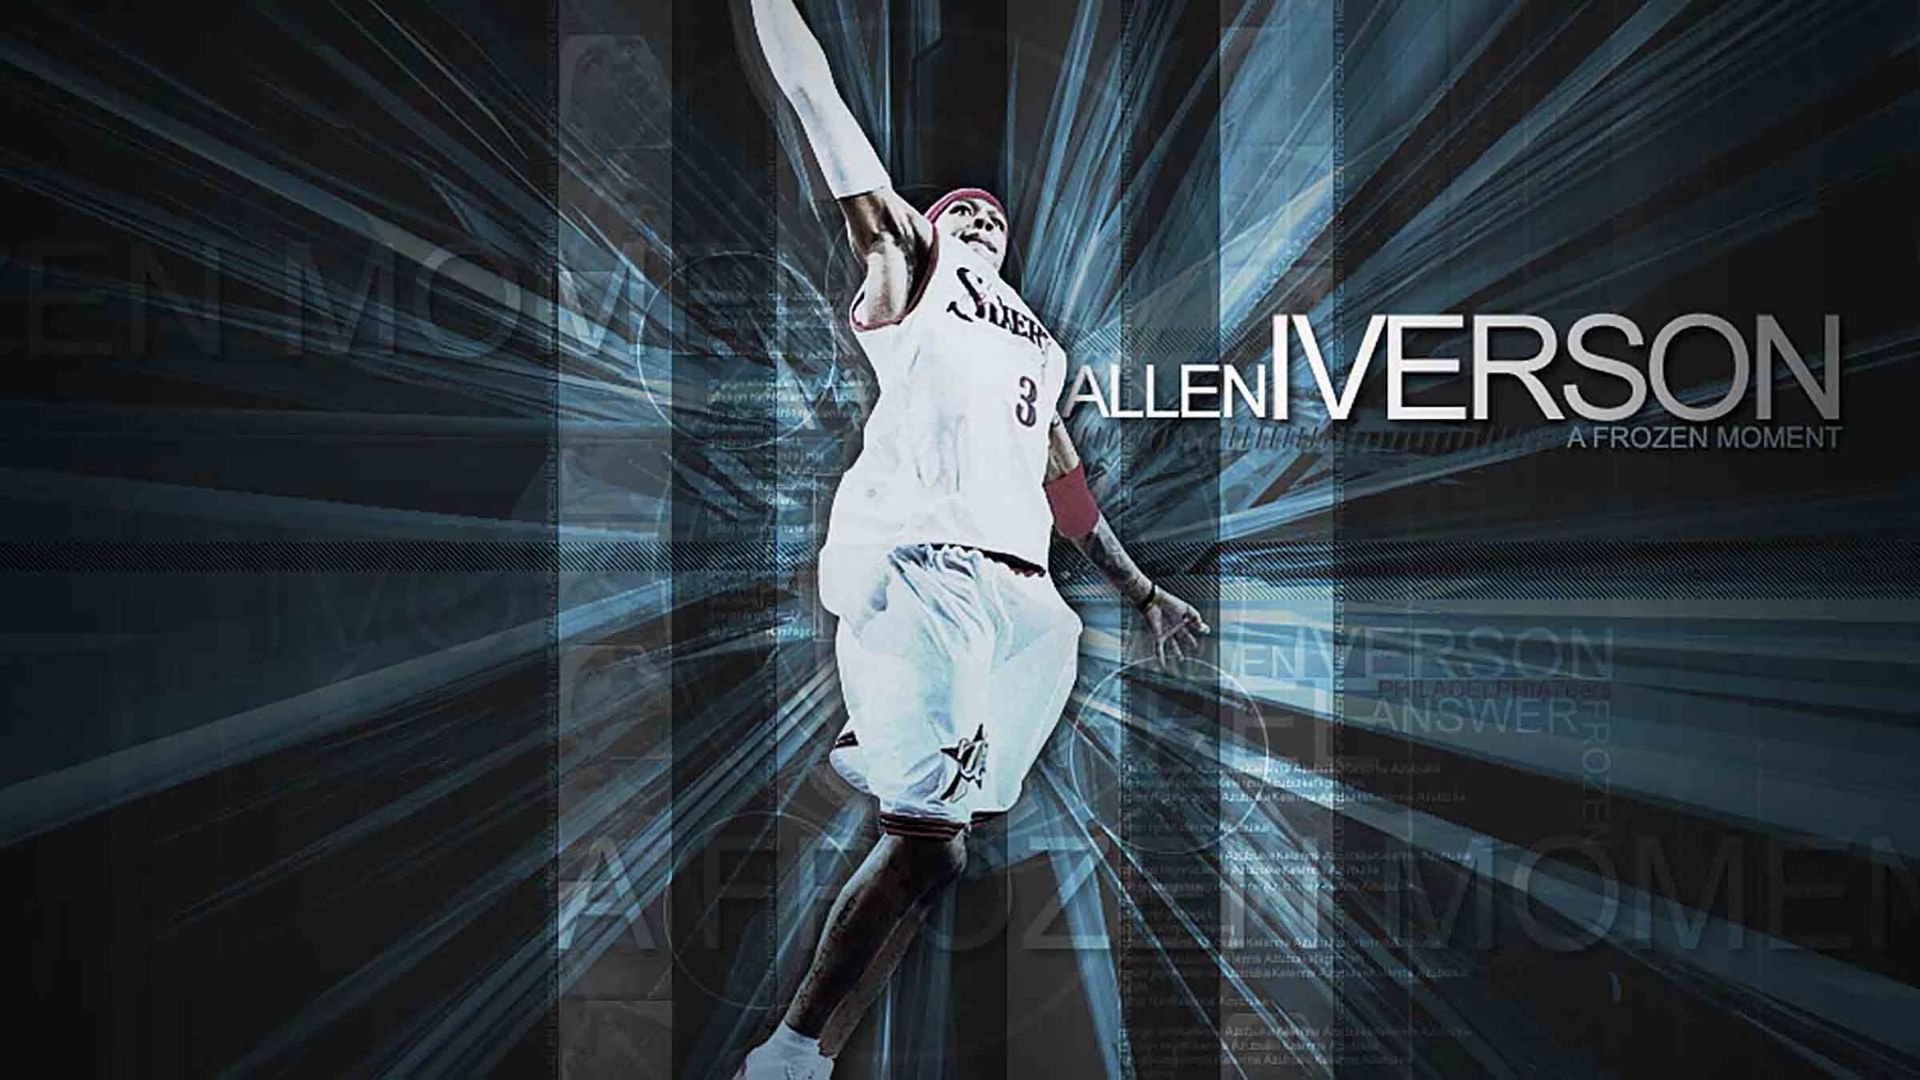 Imacc Sports - Allen Iverson Wallpaper for your phone download it now! 👇